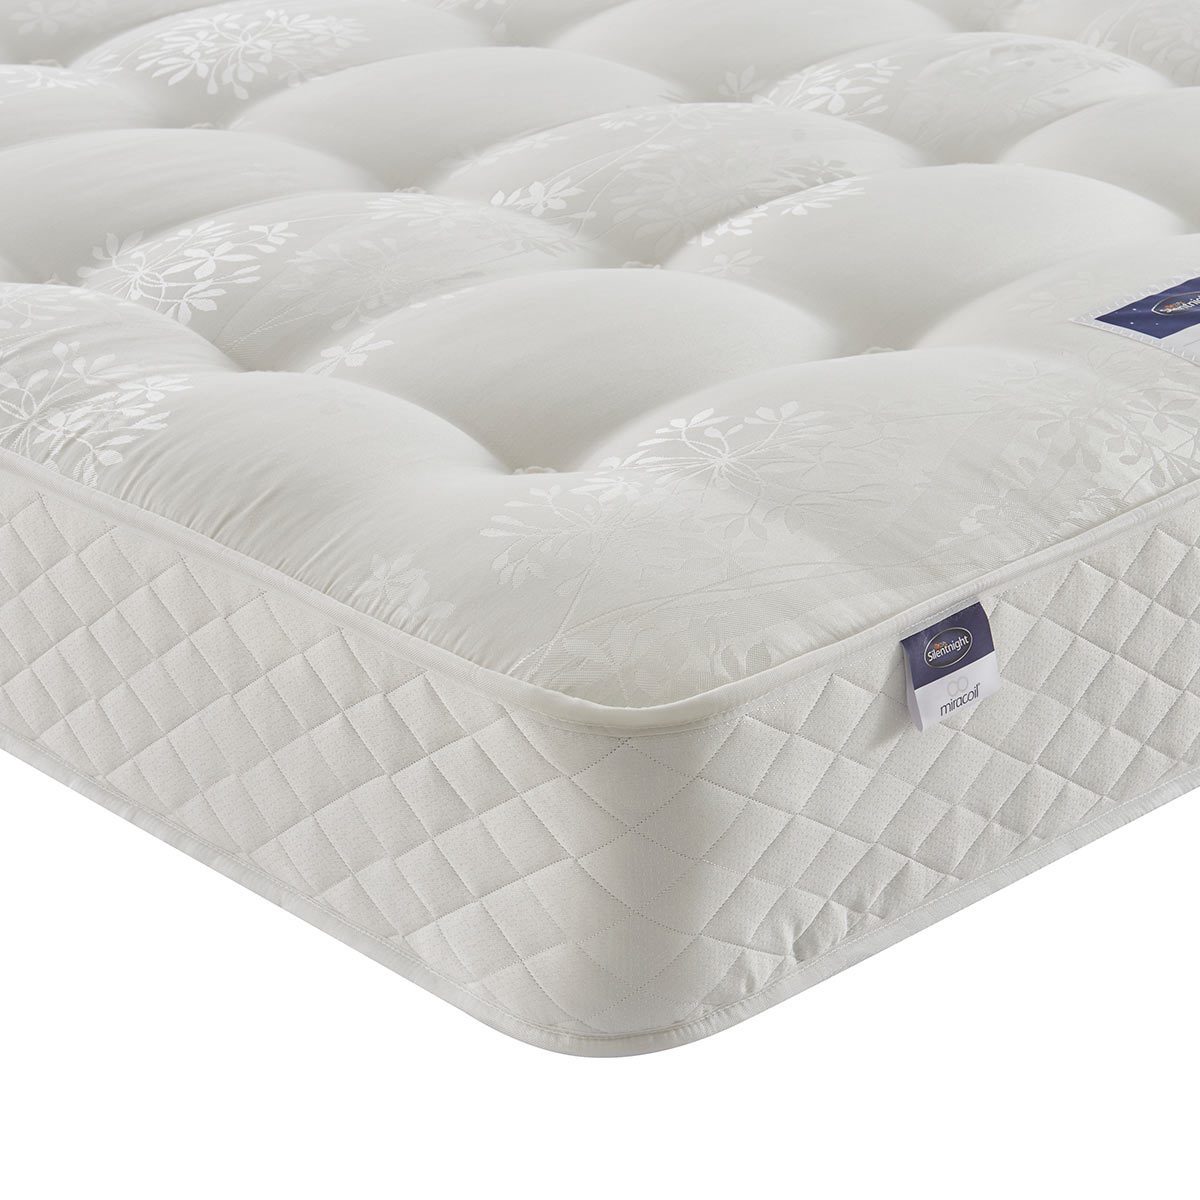 Silentnight Bexley Eco Miracoil Ortho Mattress Collection - Signature Retail Stores